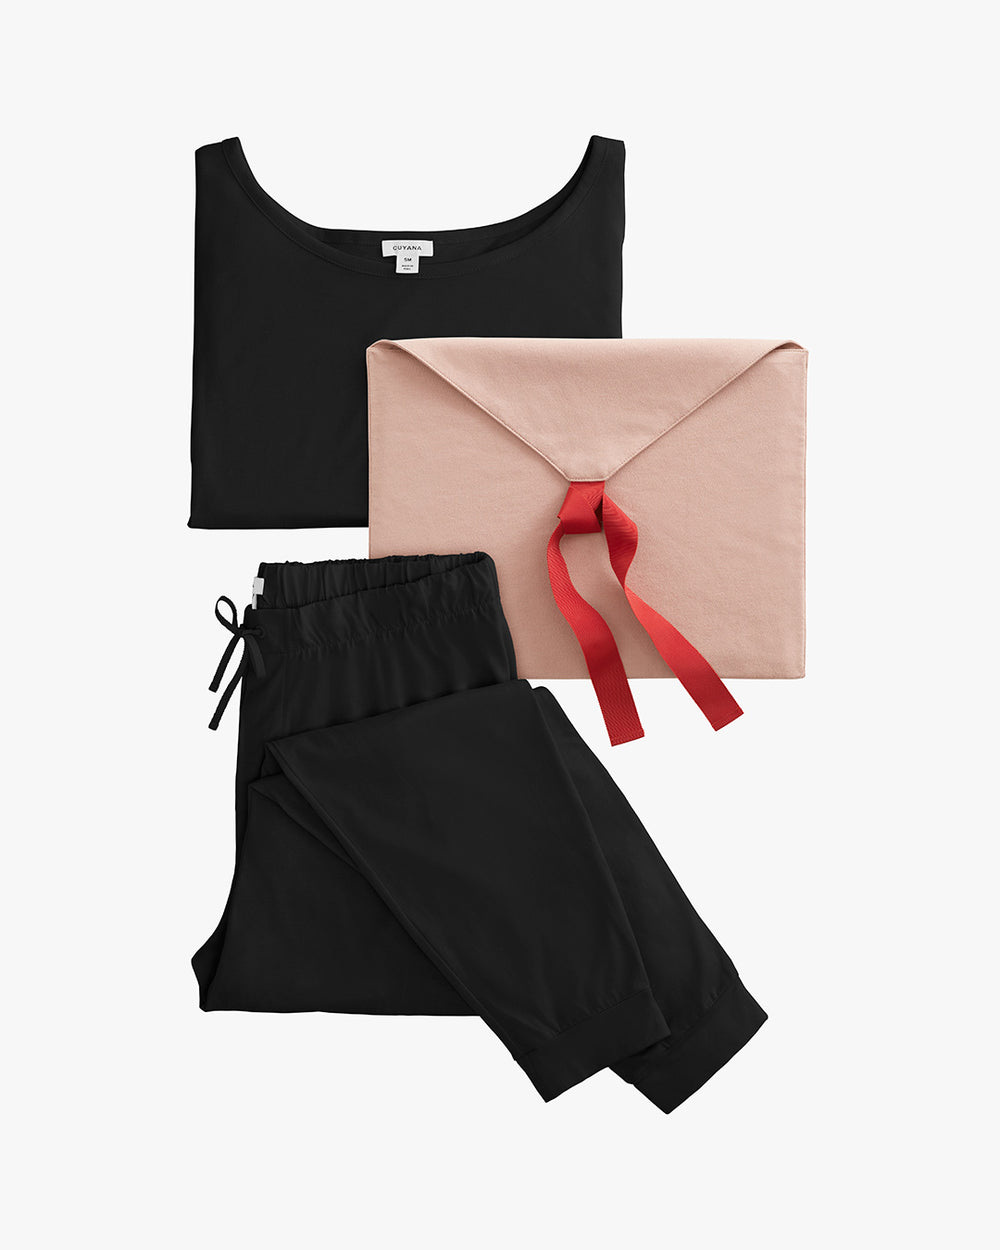 Top, pants, and a gift envelope with ribbon arranged on solid background.